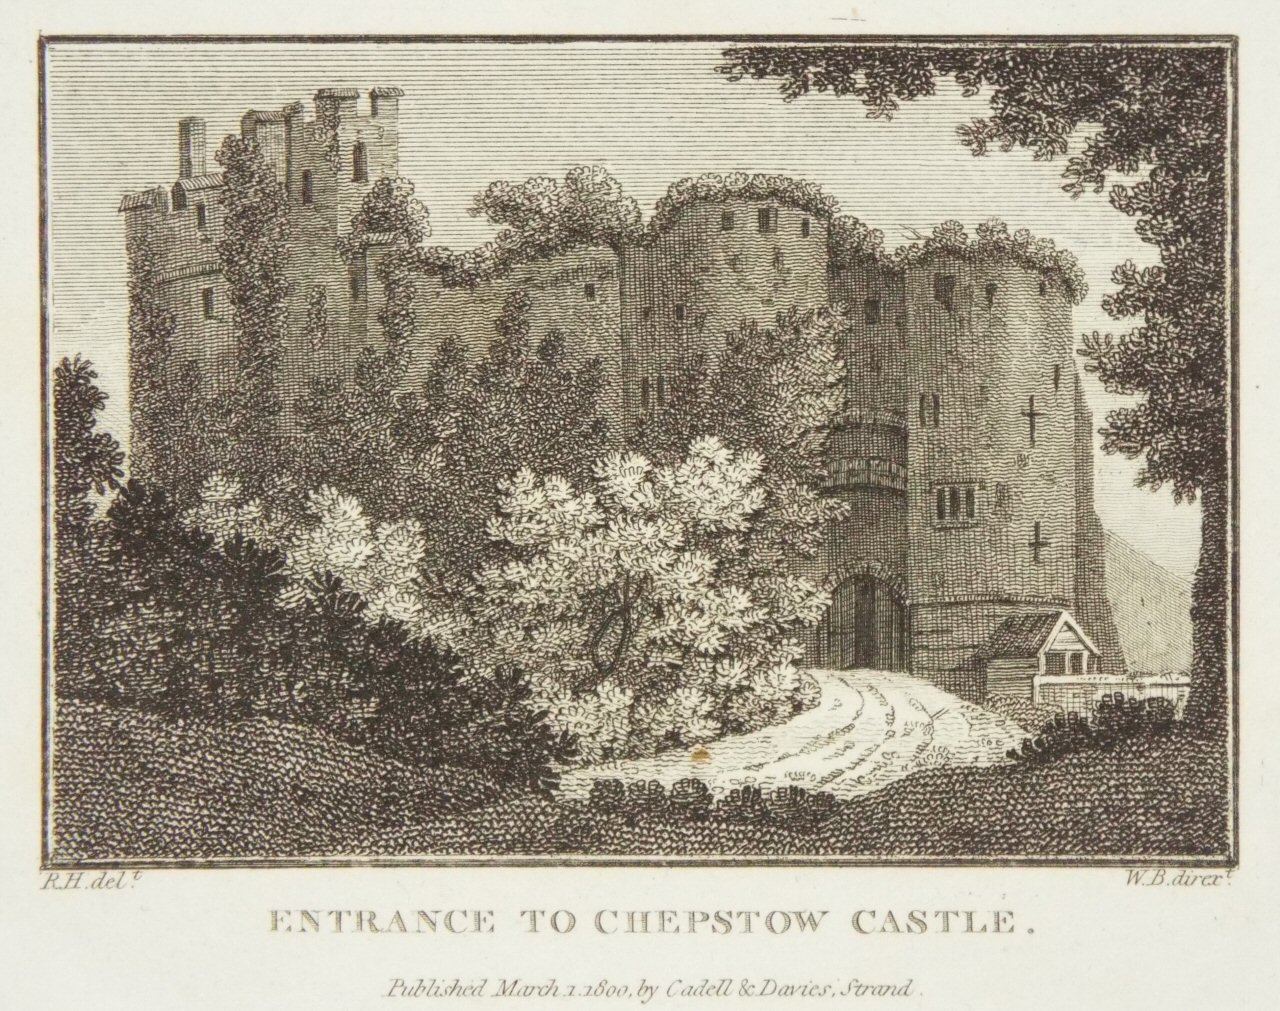 Print - Entrance to Chepstow Castle. - W